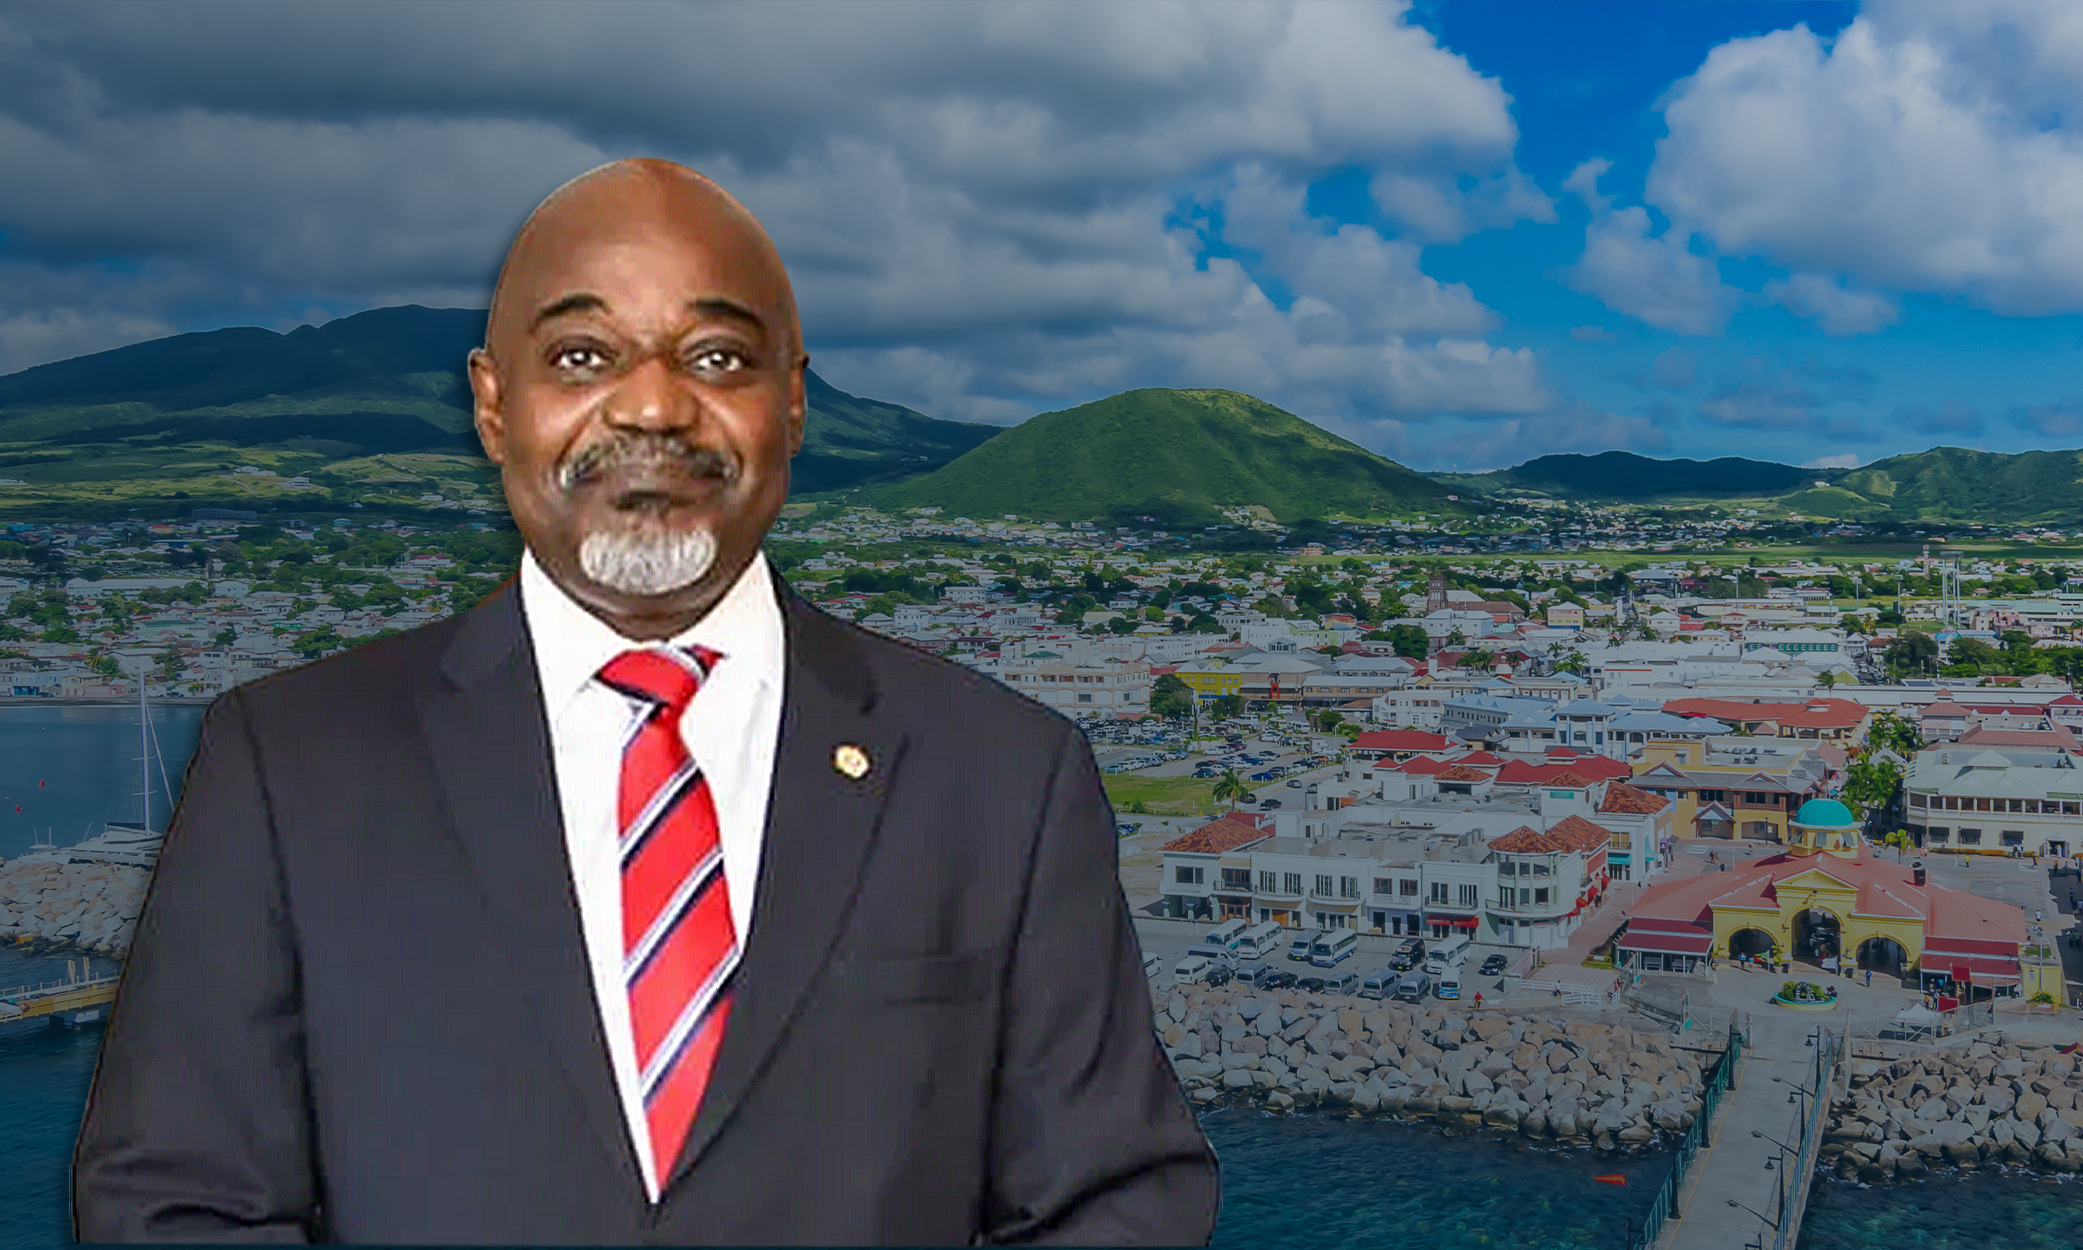 New St Kitts And Nevis Head of CIU Introduces Limited Time Offer Among Other Comprehensive Developments